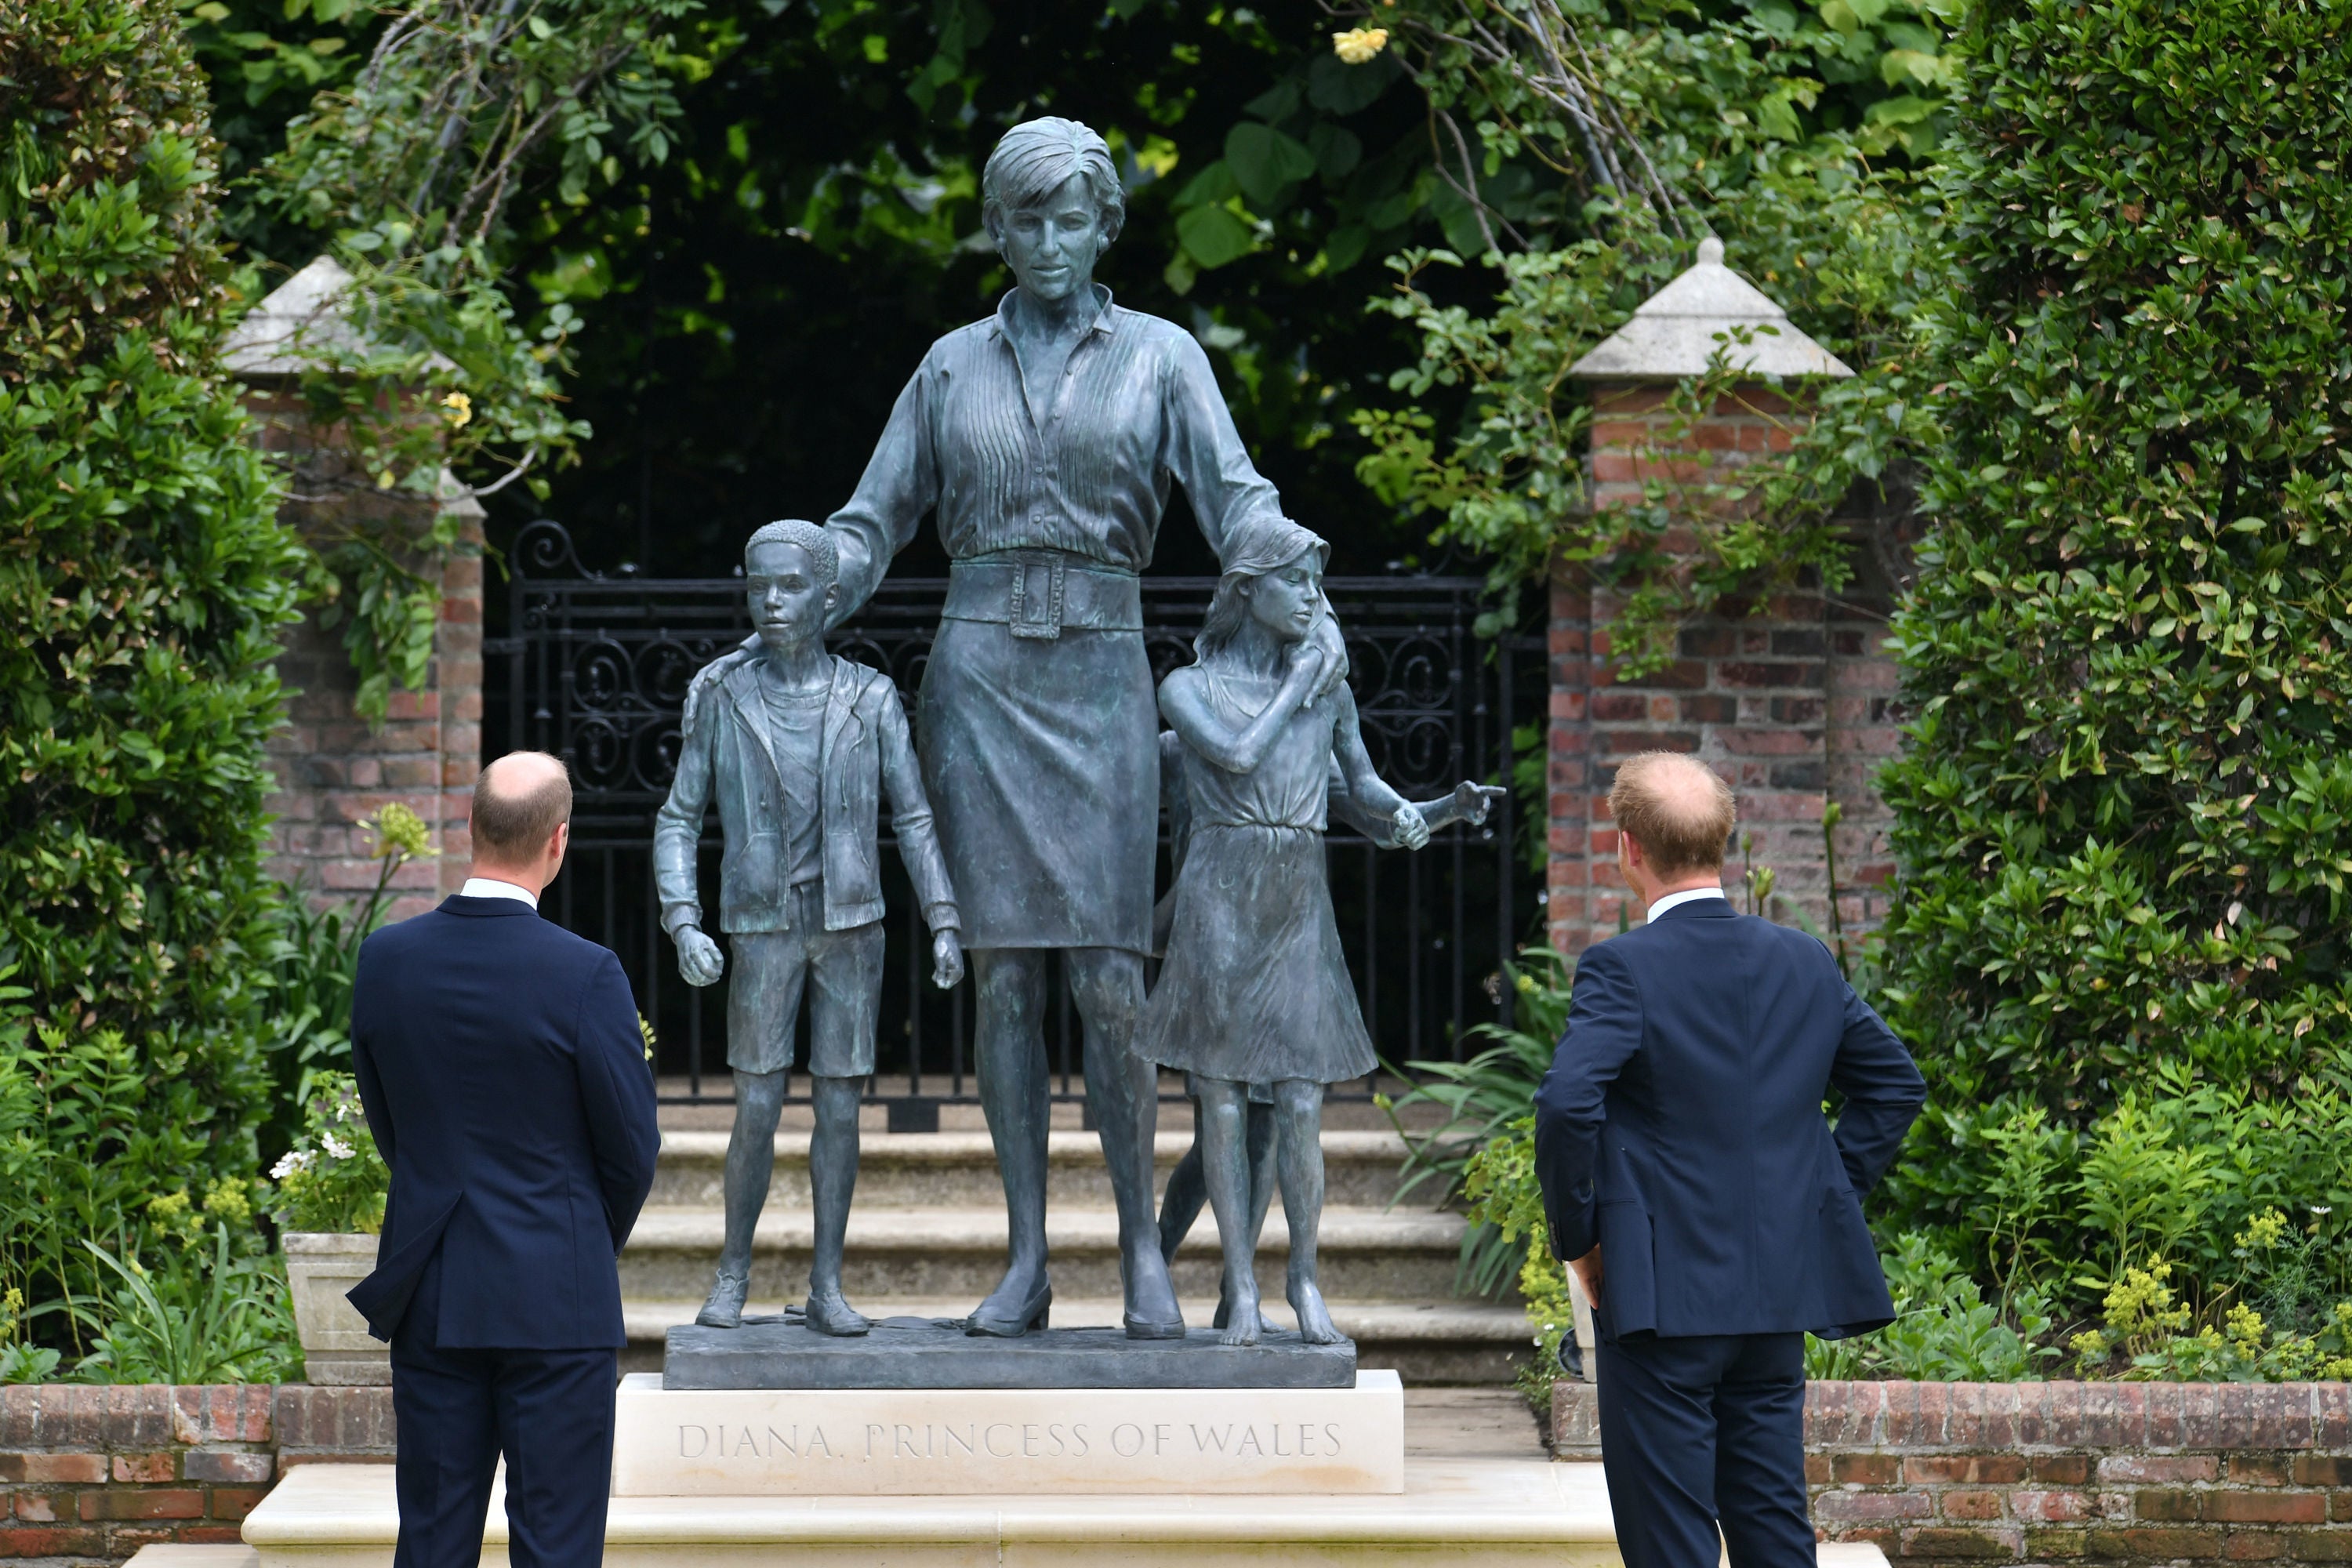 The Duke of Cambridge (left) and Duke of Sussex look at the statue they commissioned of Diana, in the Sunken Garden at Kensington Palace